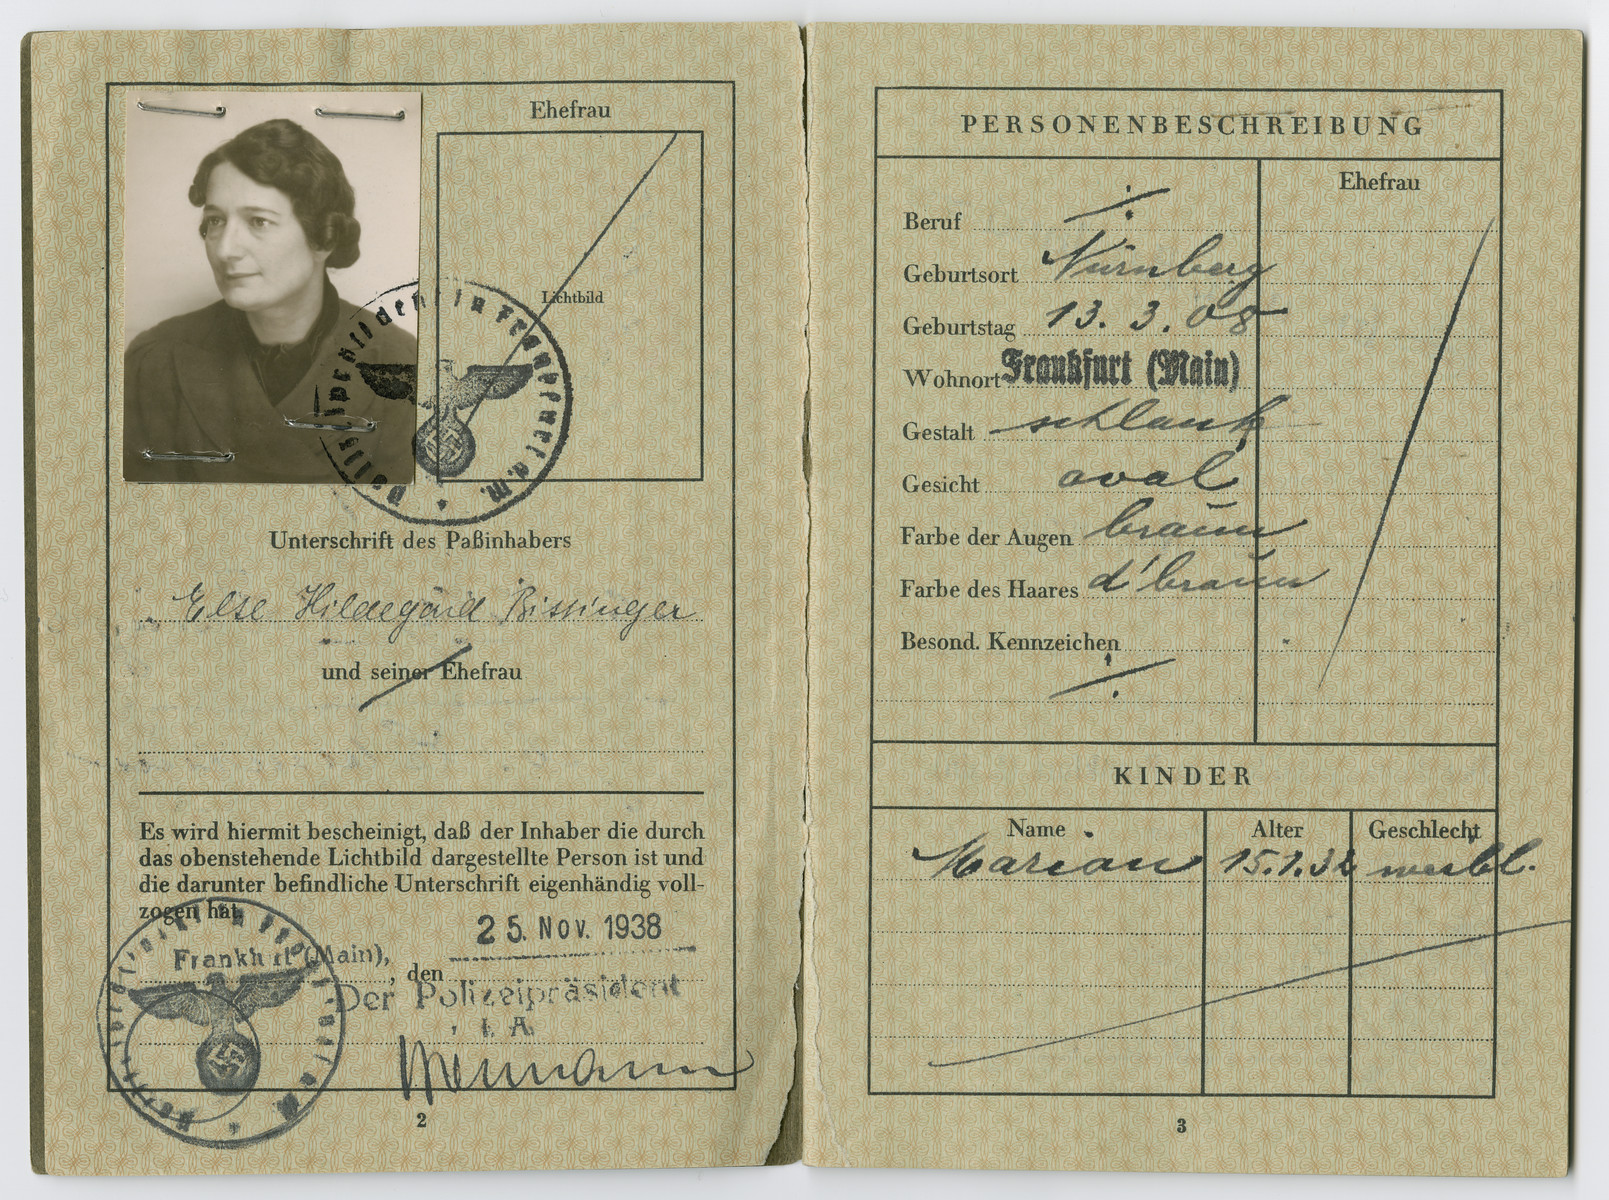 Passport issued to Else Hildegard Bissinger (mother of the donor).